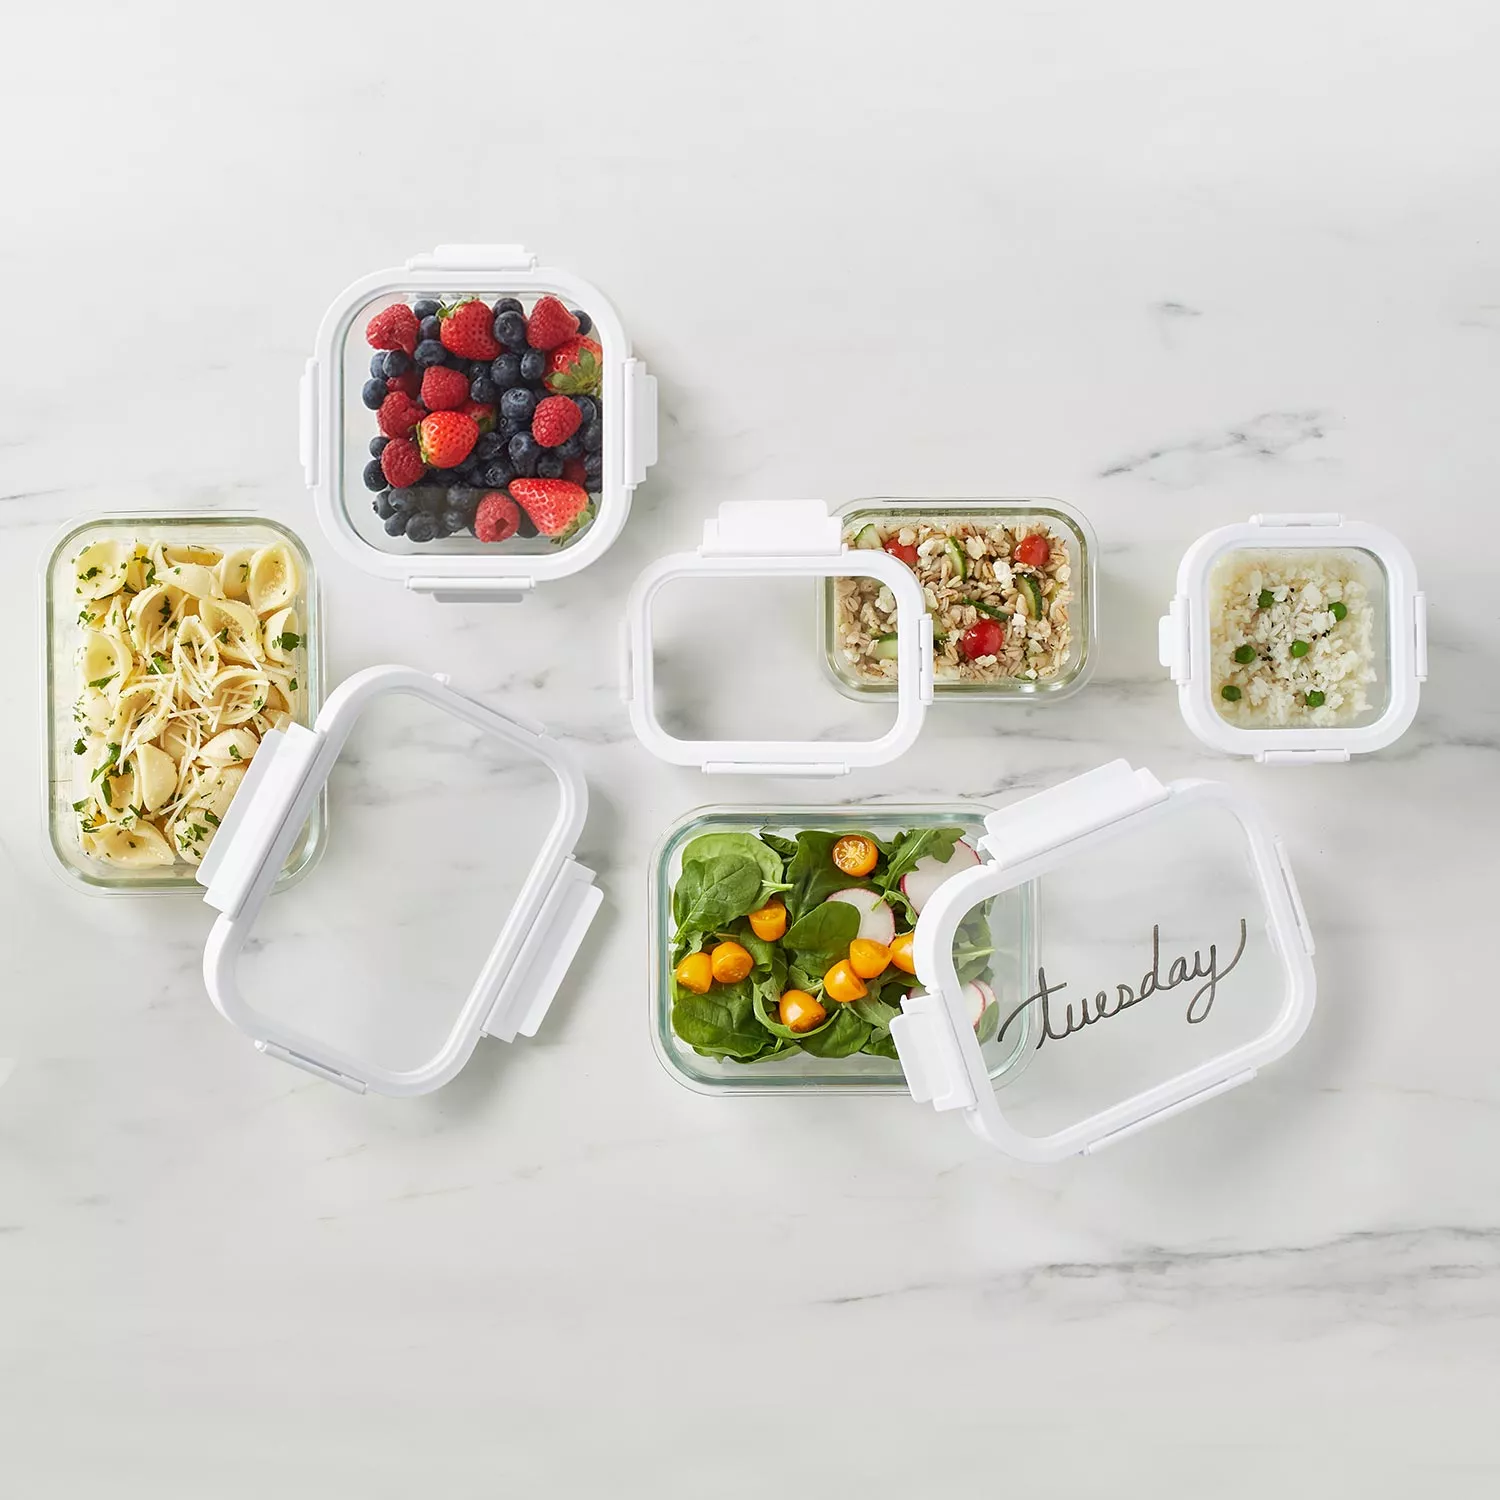 ACE BOROSILICATE GLASS LUNCH BOXES SET OF 3 CONTAINERS WITH LUNCH BAG